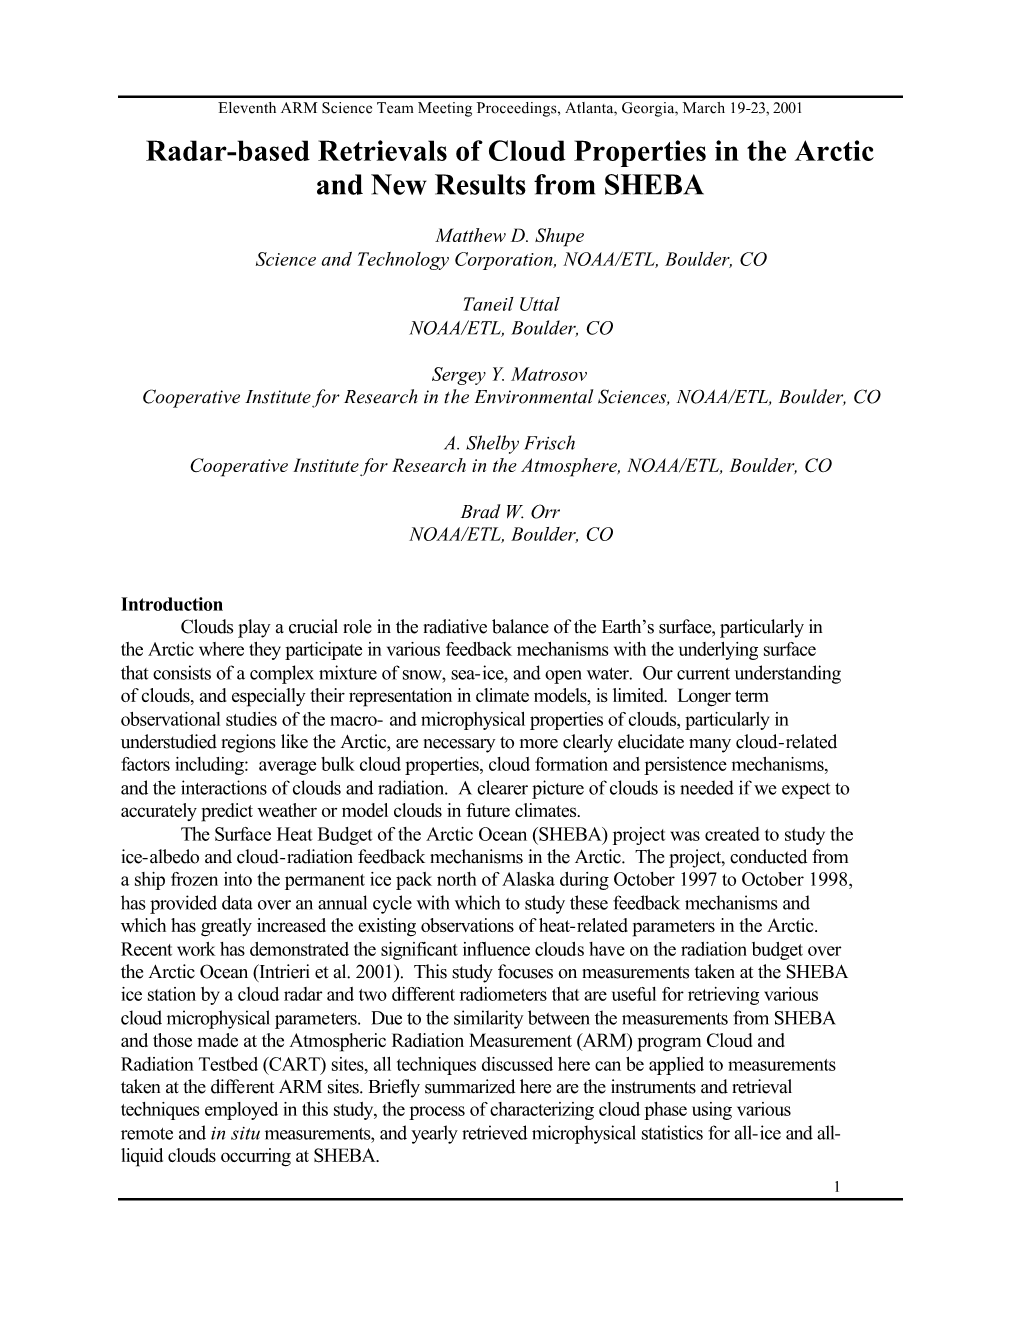 Radar-Based Retrievals of Cloud Properties in the Arctic and New Results from SHEBA